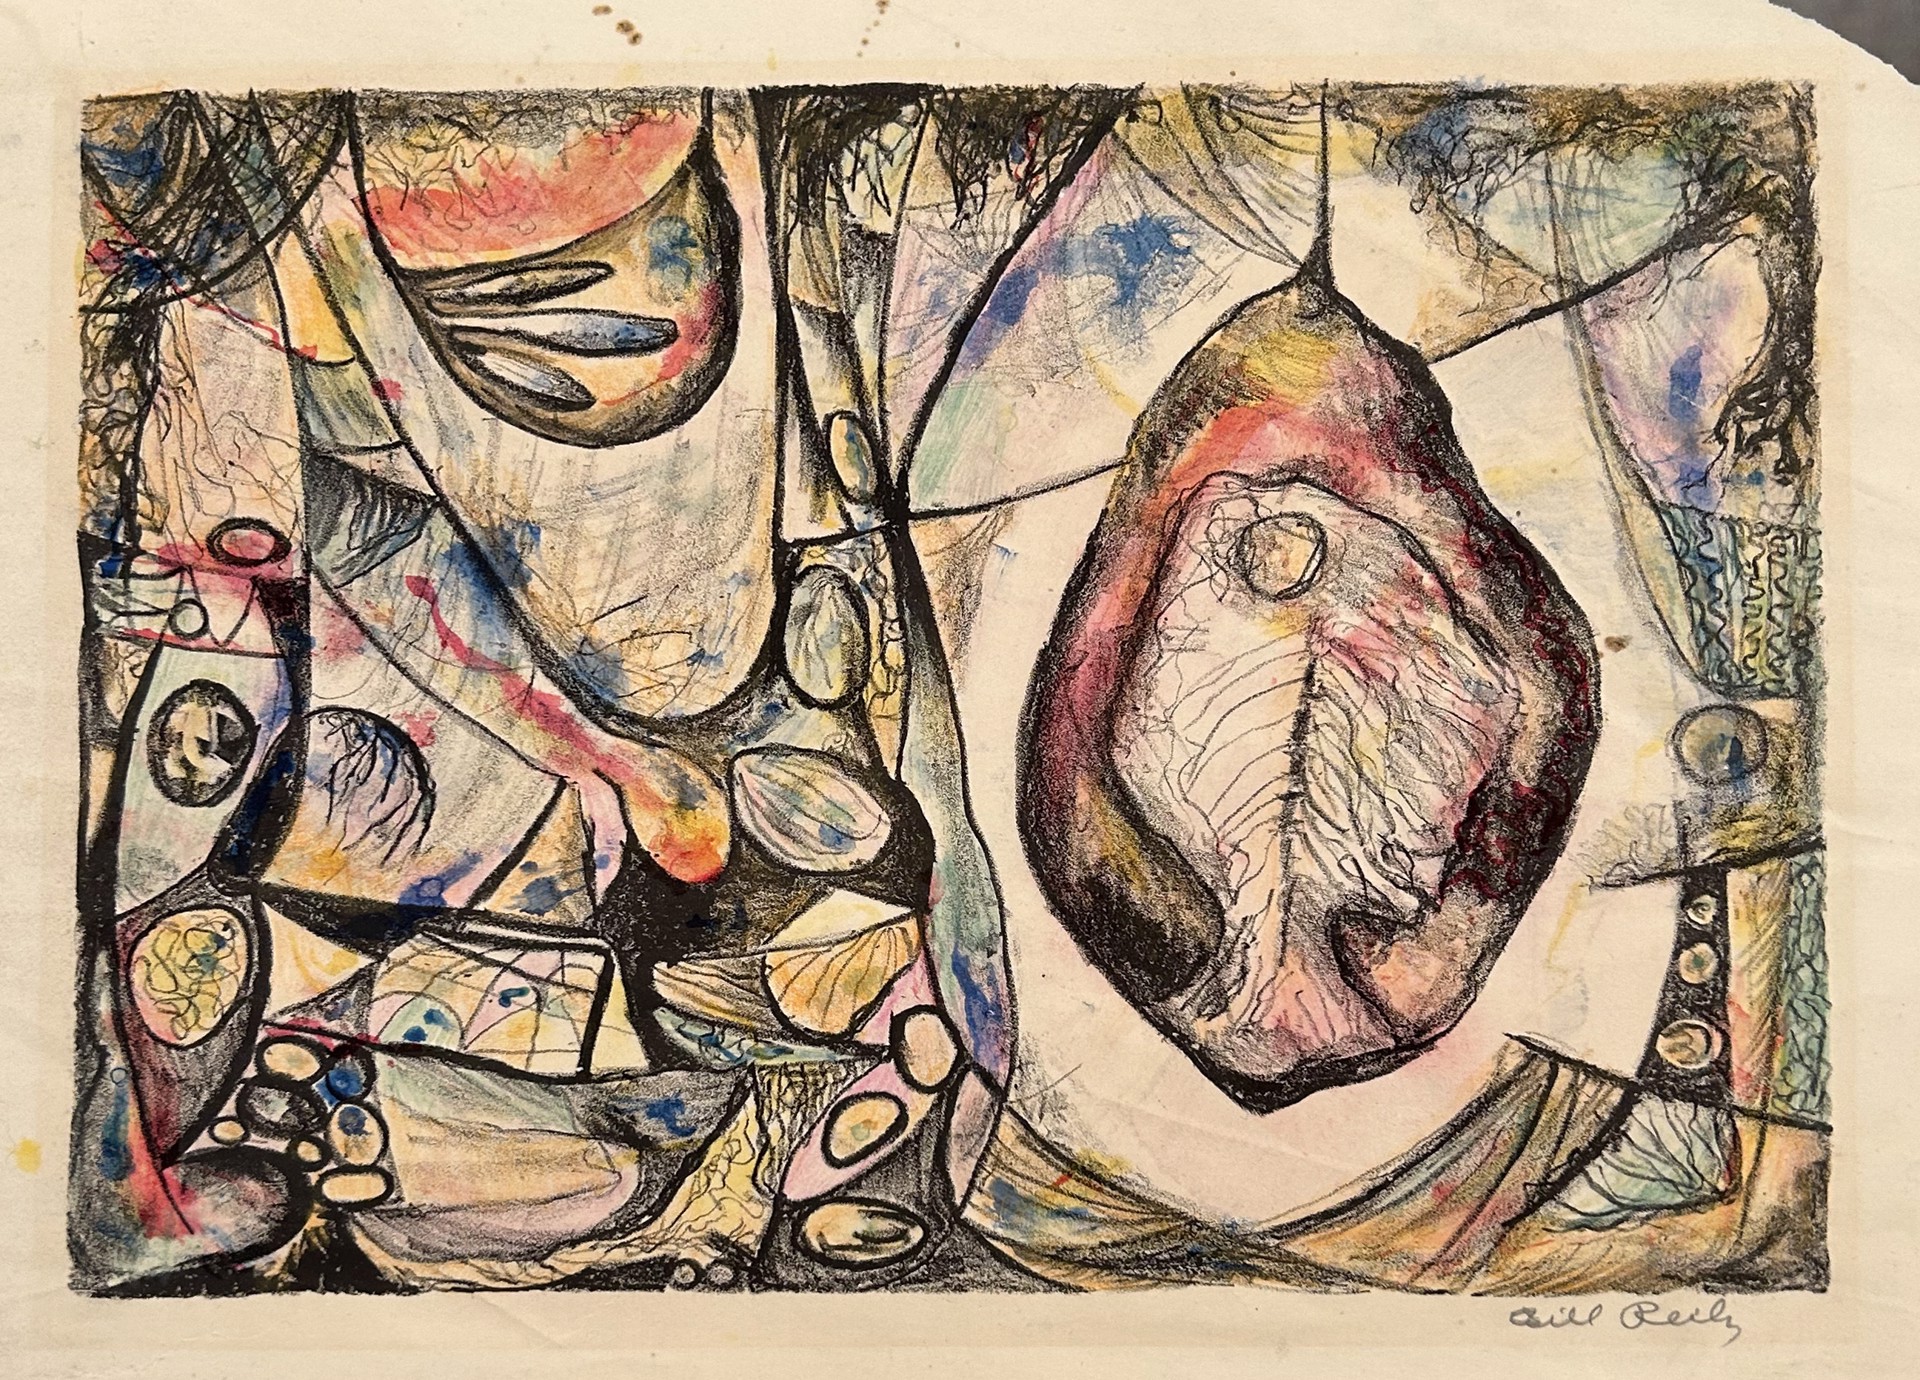 71. Untitled (hand colored) by Bill Reily - Prints